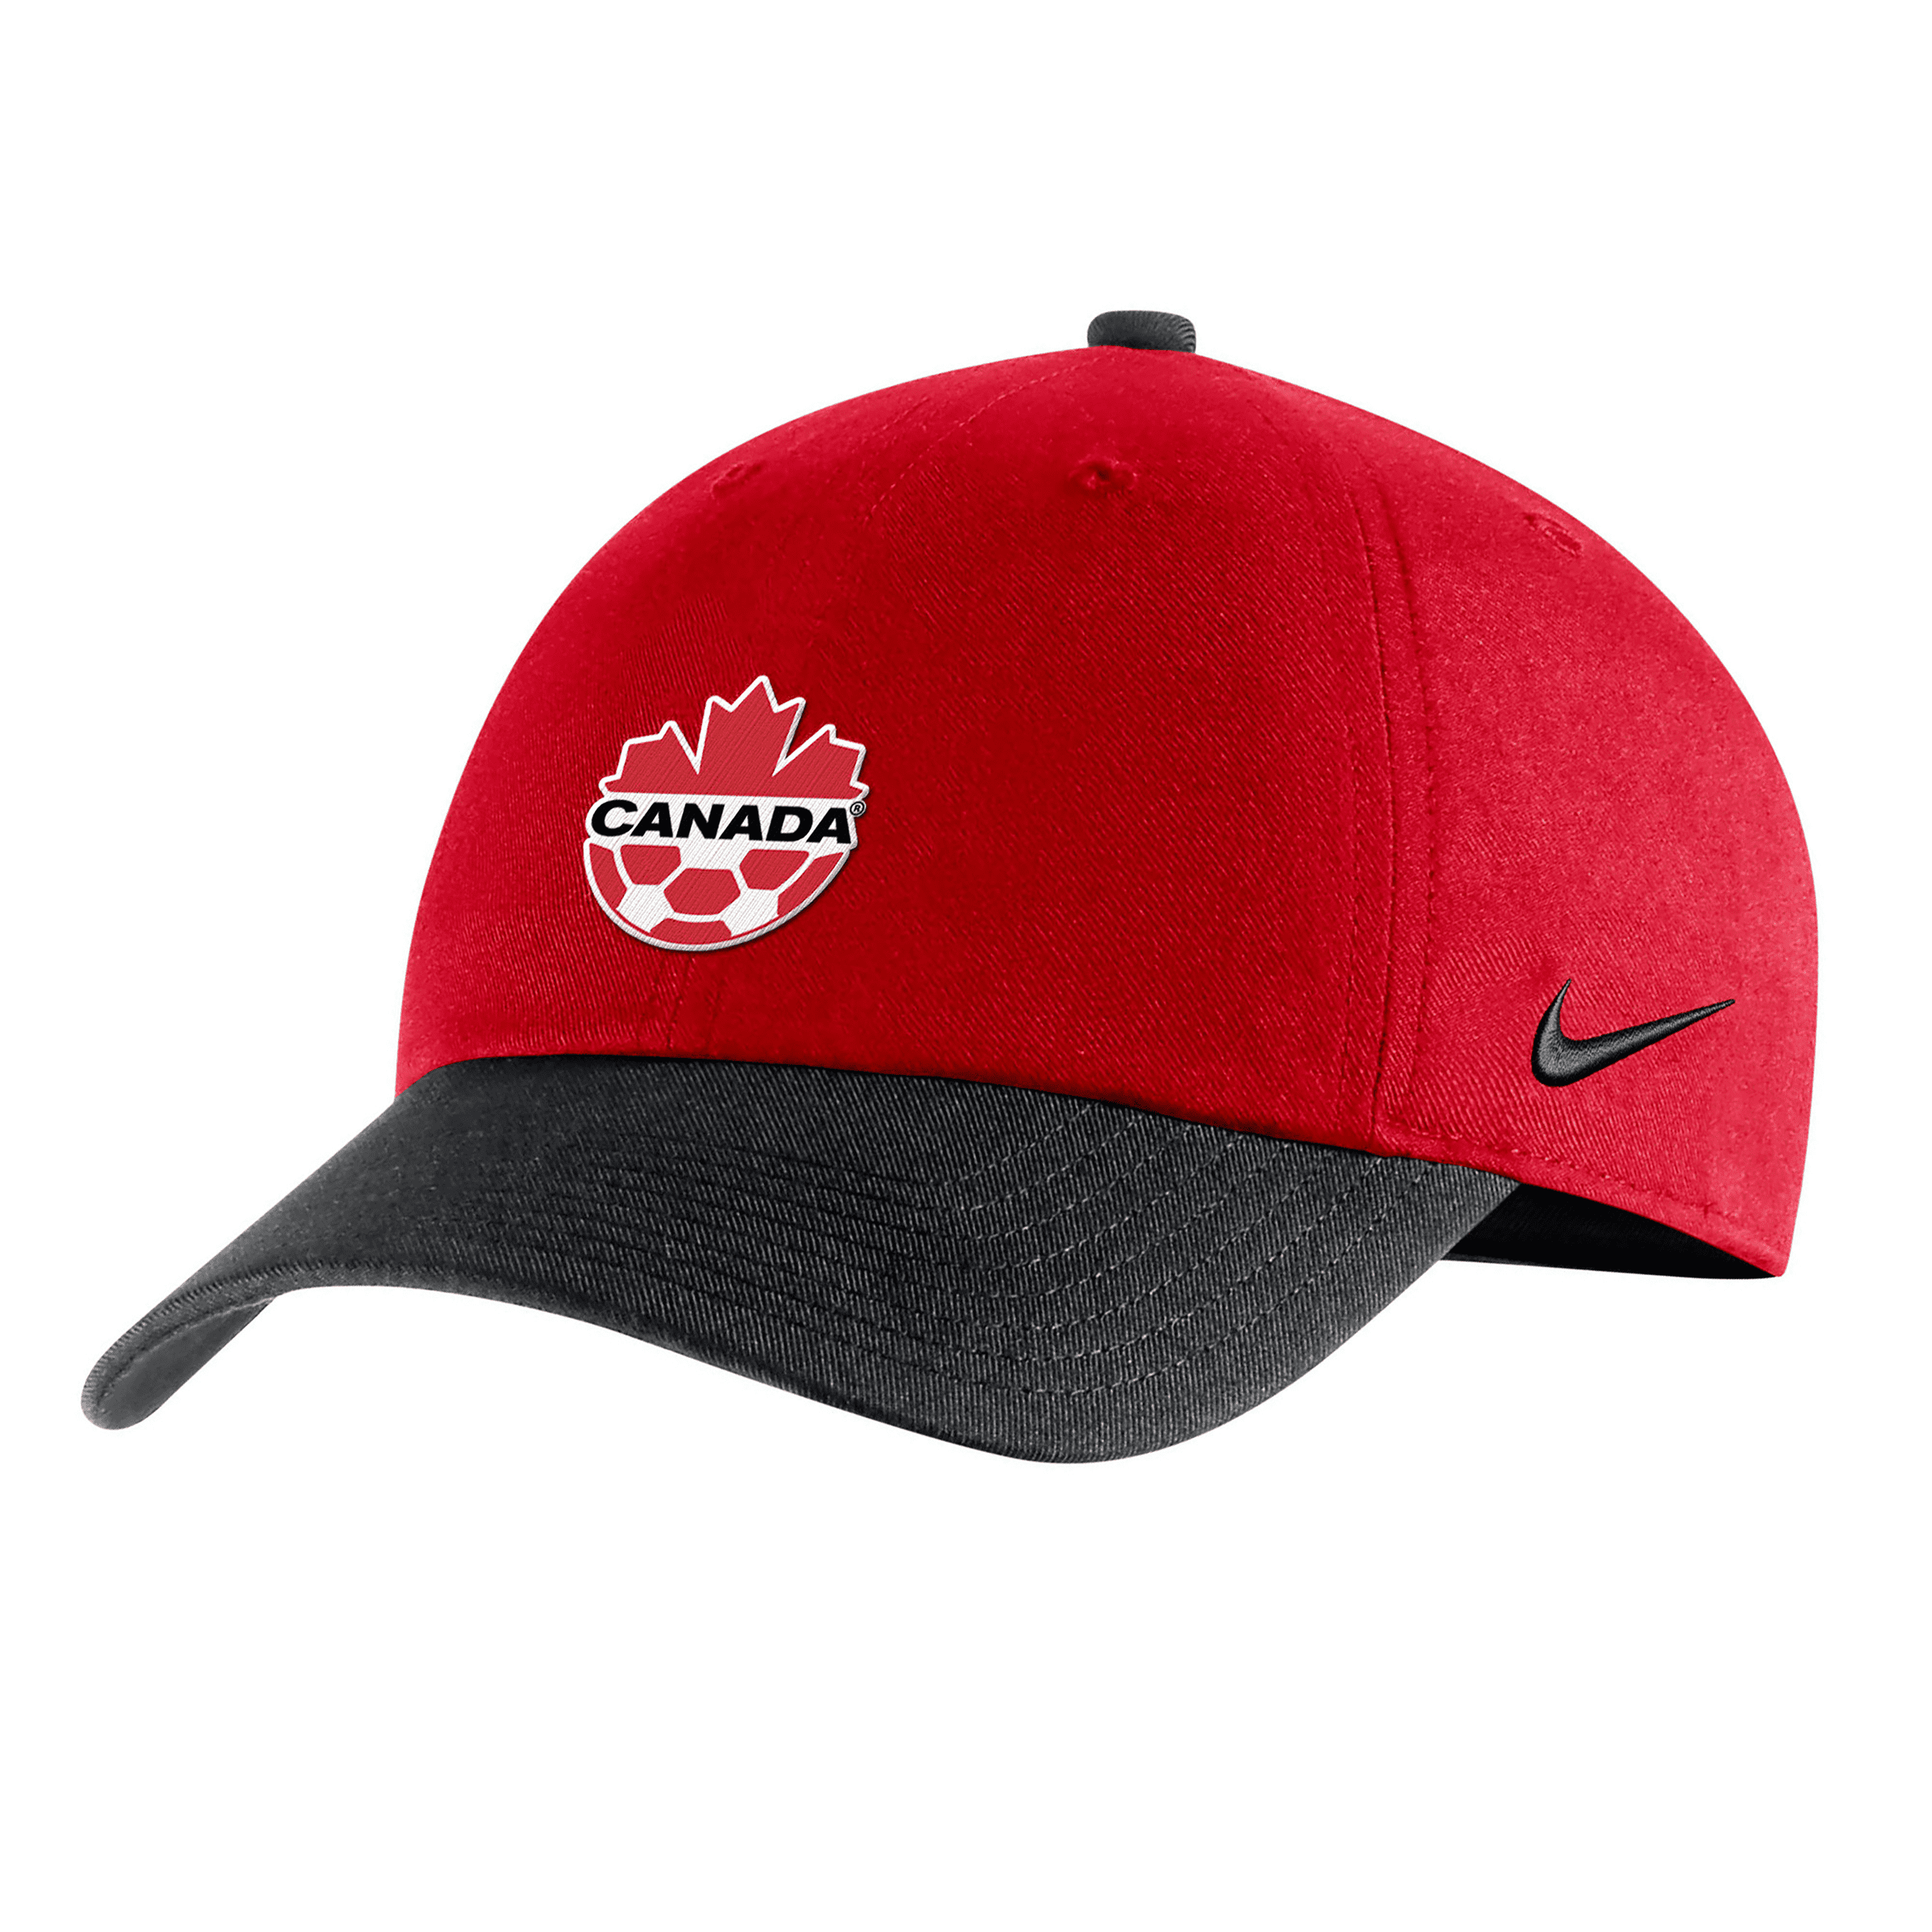 Nike Unisex Canada Heritage86 Adjustable Hat In Red